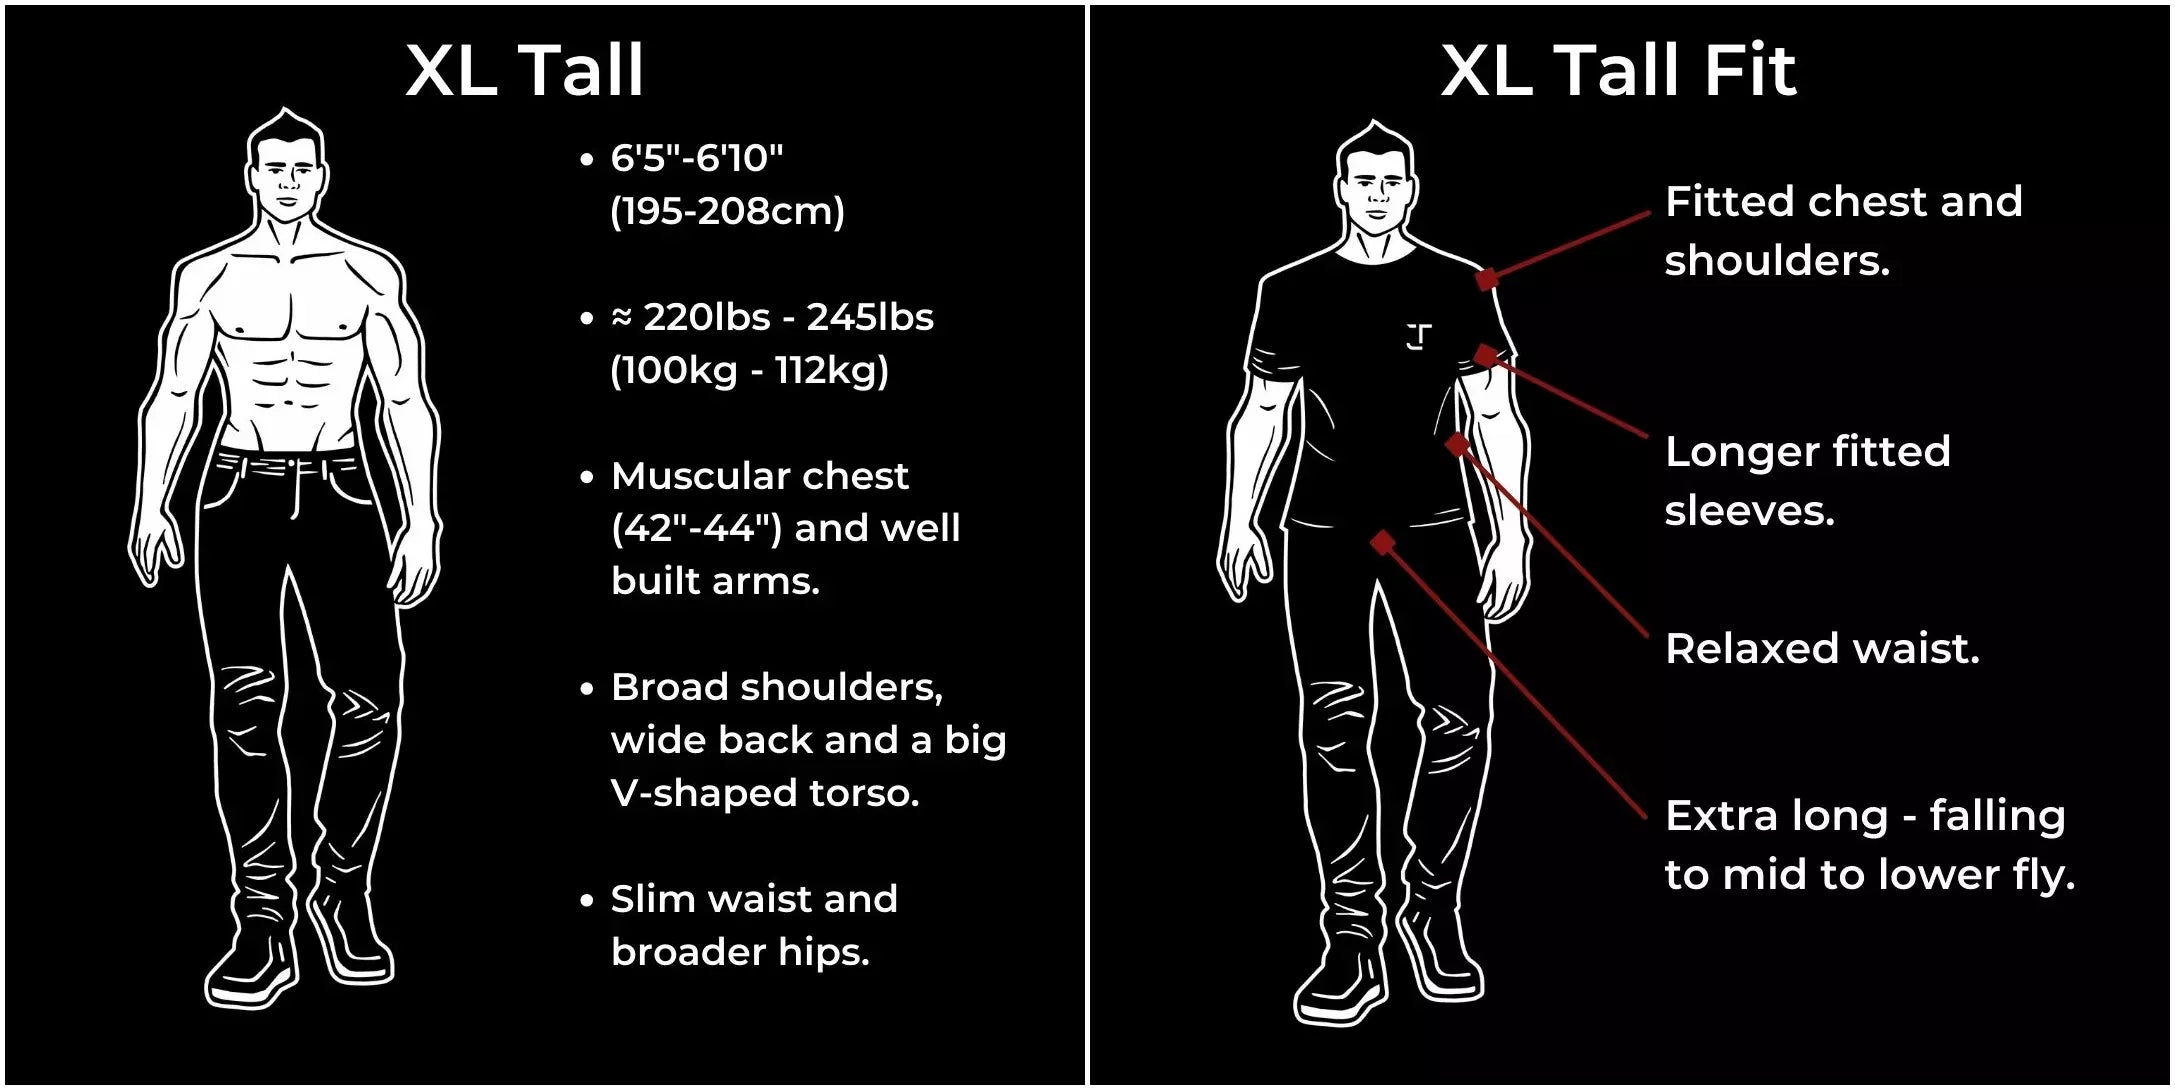 XL tall for tall and muscular guys 220-245lbs and 6'5" - 6'10".